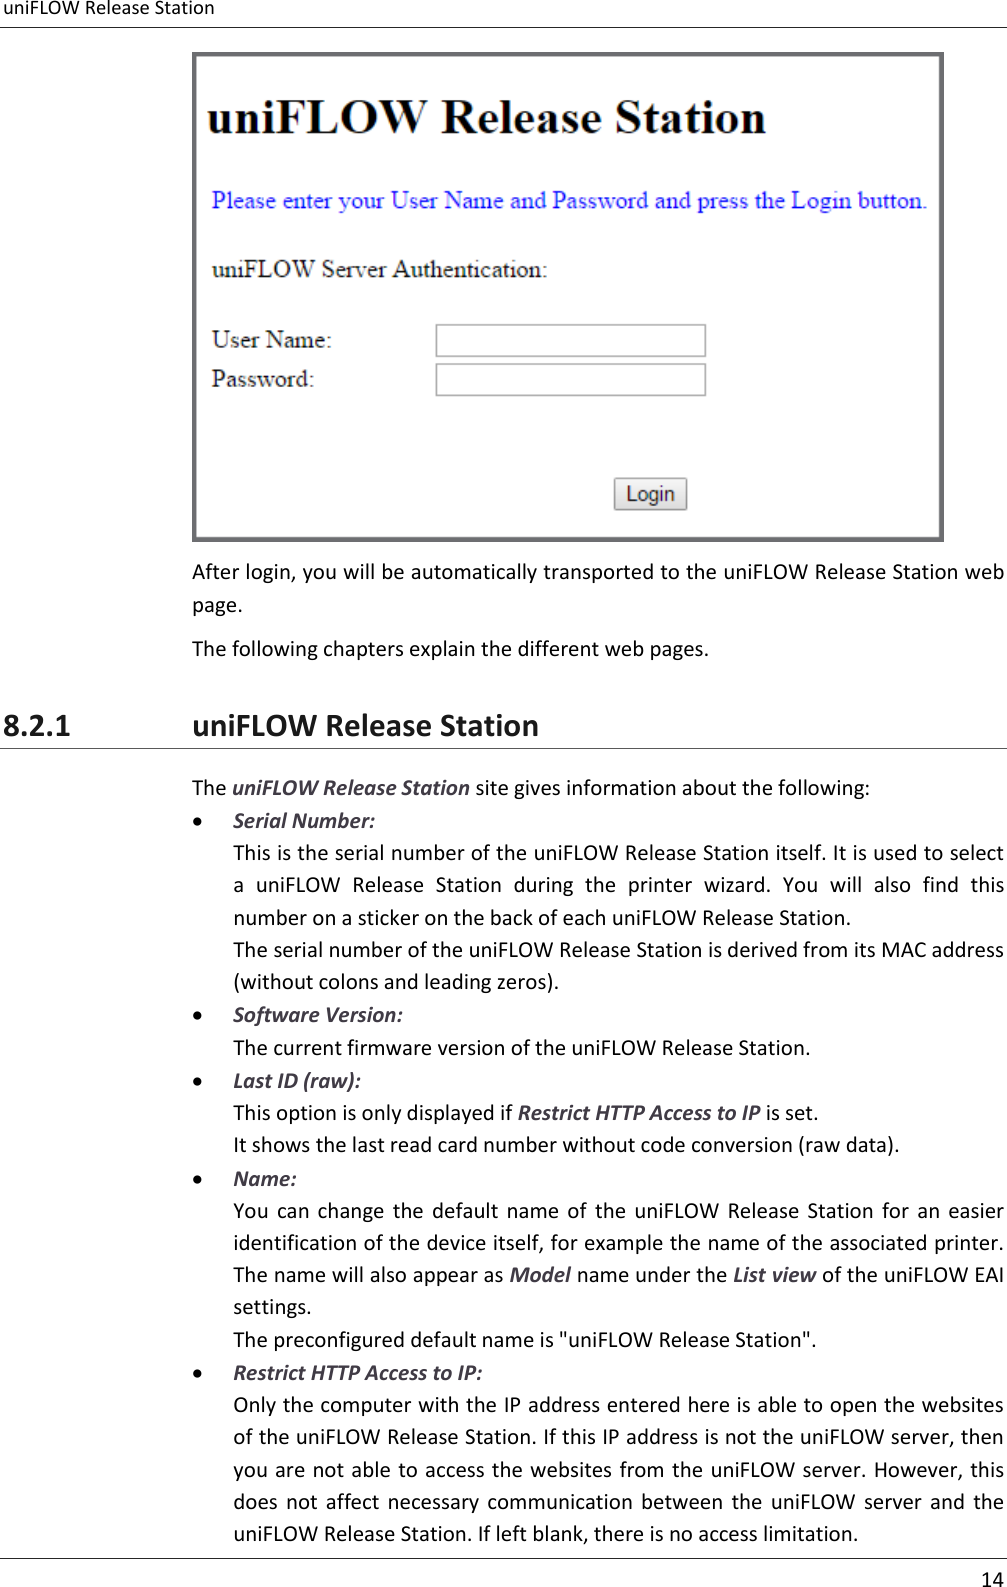 uniFLOW Release Station     14   After login, you will be automatically transported to the uniFLOW Release Station web page. The following chapters explain the different web pages. 8.2.1 uniFLOW Release Station The uniFLOW Release Station site gives information about the following:  Serial Number: This is the serial number of the uniFLOW Release Station itself. It is used to select a  uniFLOW  Release  Station  during  the  printer  wizard.  You  will  also  find  this number on a sticker on the back of each uniFLOW Release Station. The serial number of the uniFLOW Release Station is derived from its MAC address (without colons and leading zeros).  Software Version: The current firmware version of the uniFLOW Release Station.  Last ID (raw): This option is only displayed if Restrict HTTP Access to IP is set. It shows the last read card number without code conversion (raw data).  Name: You  can  change  the  default  name  of  the  uniFLOW  Release  Station  for  an  easier identification of the device itself, for example the name of the associated printer. The name will also appear as Model name under the List view of the uniFLOW EAI settings. The preconfigured default name is &quot;uniFLOW Release Station&quot;.  Restrict HTTP Access to IP: Only the computer with the IP address entered here is able to open the websites of the uniFLOW Release Station. If this IP address is not the uniFLOW server, then you are not able to access the websites from the uniFLOW server. However, this does  not  affect  necessary communication  between  the  uniFLOW  server  and  the uniFLOW Release Station. If left blank, there is no access limitation. 